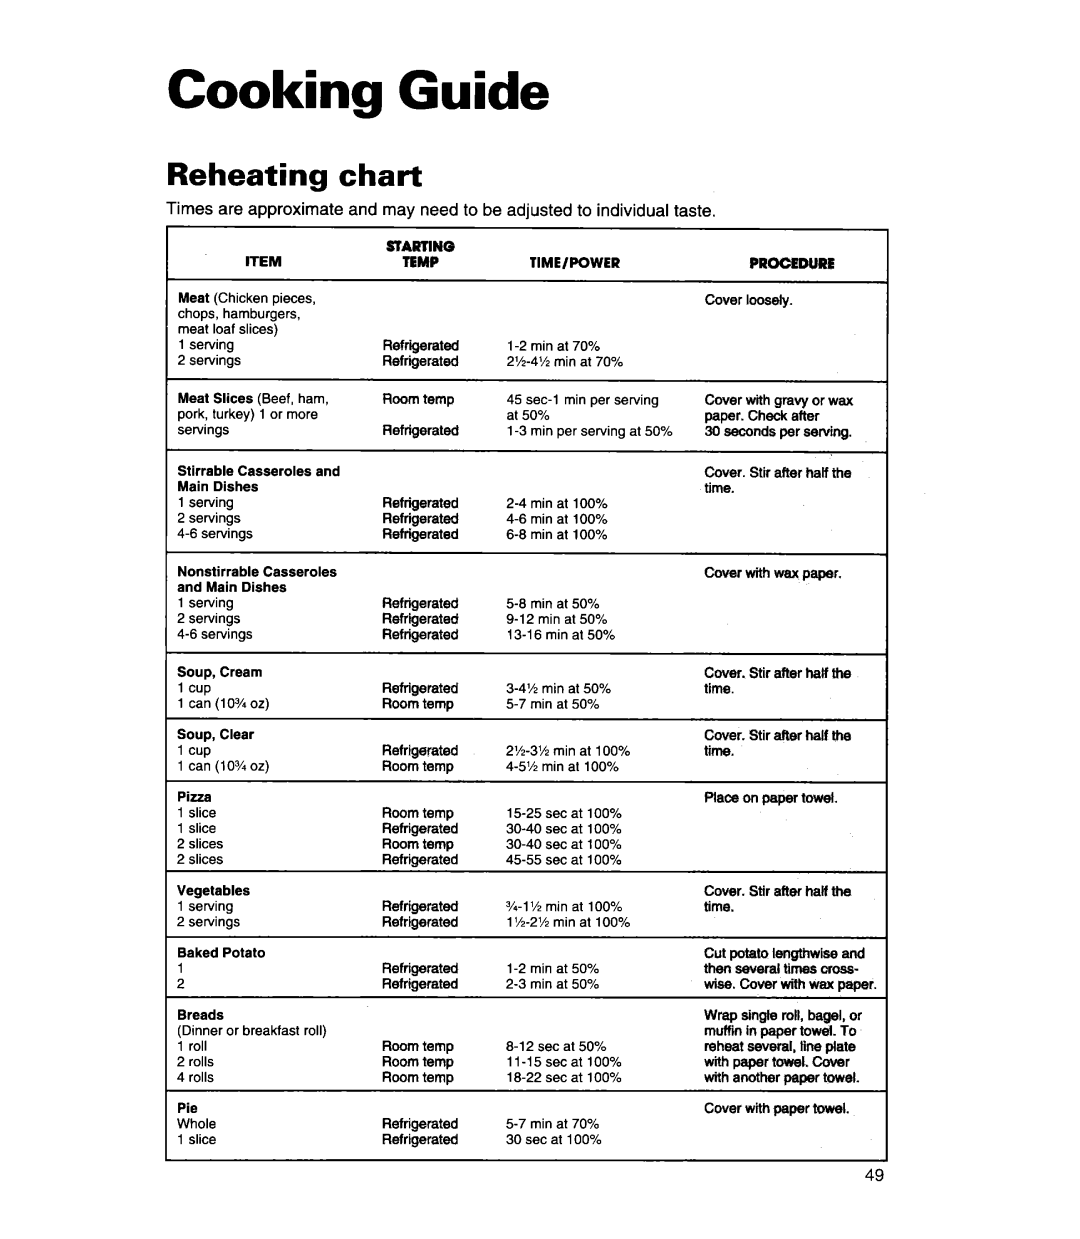 Whirlpool MH7130XE warranty Cooking Guide, Reheating chart 